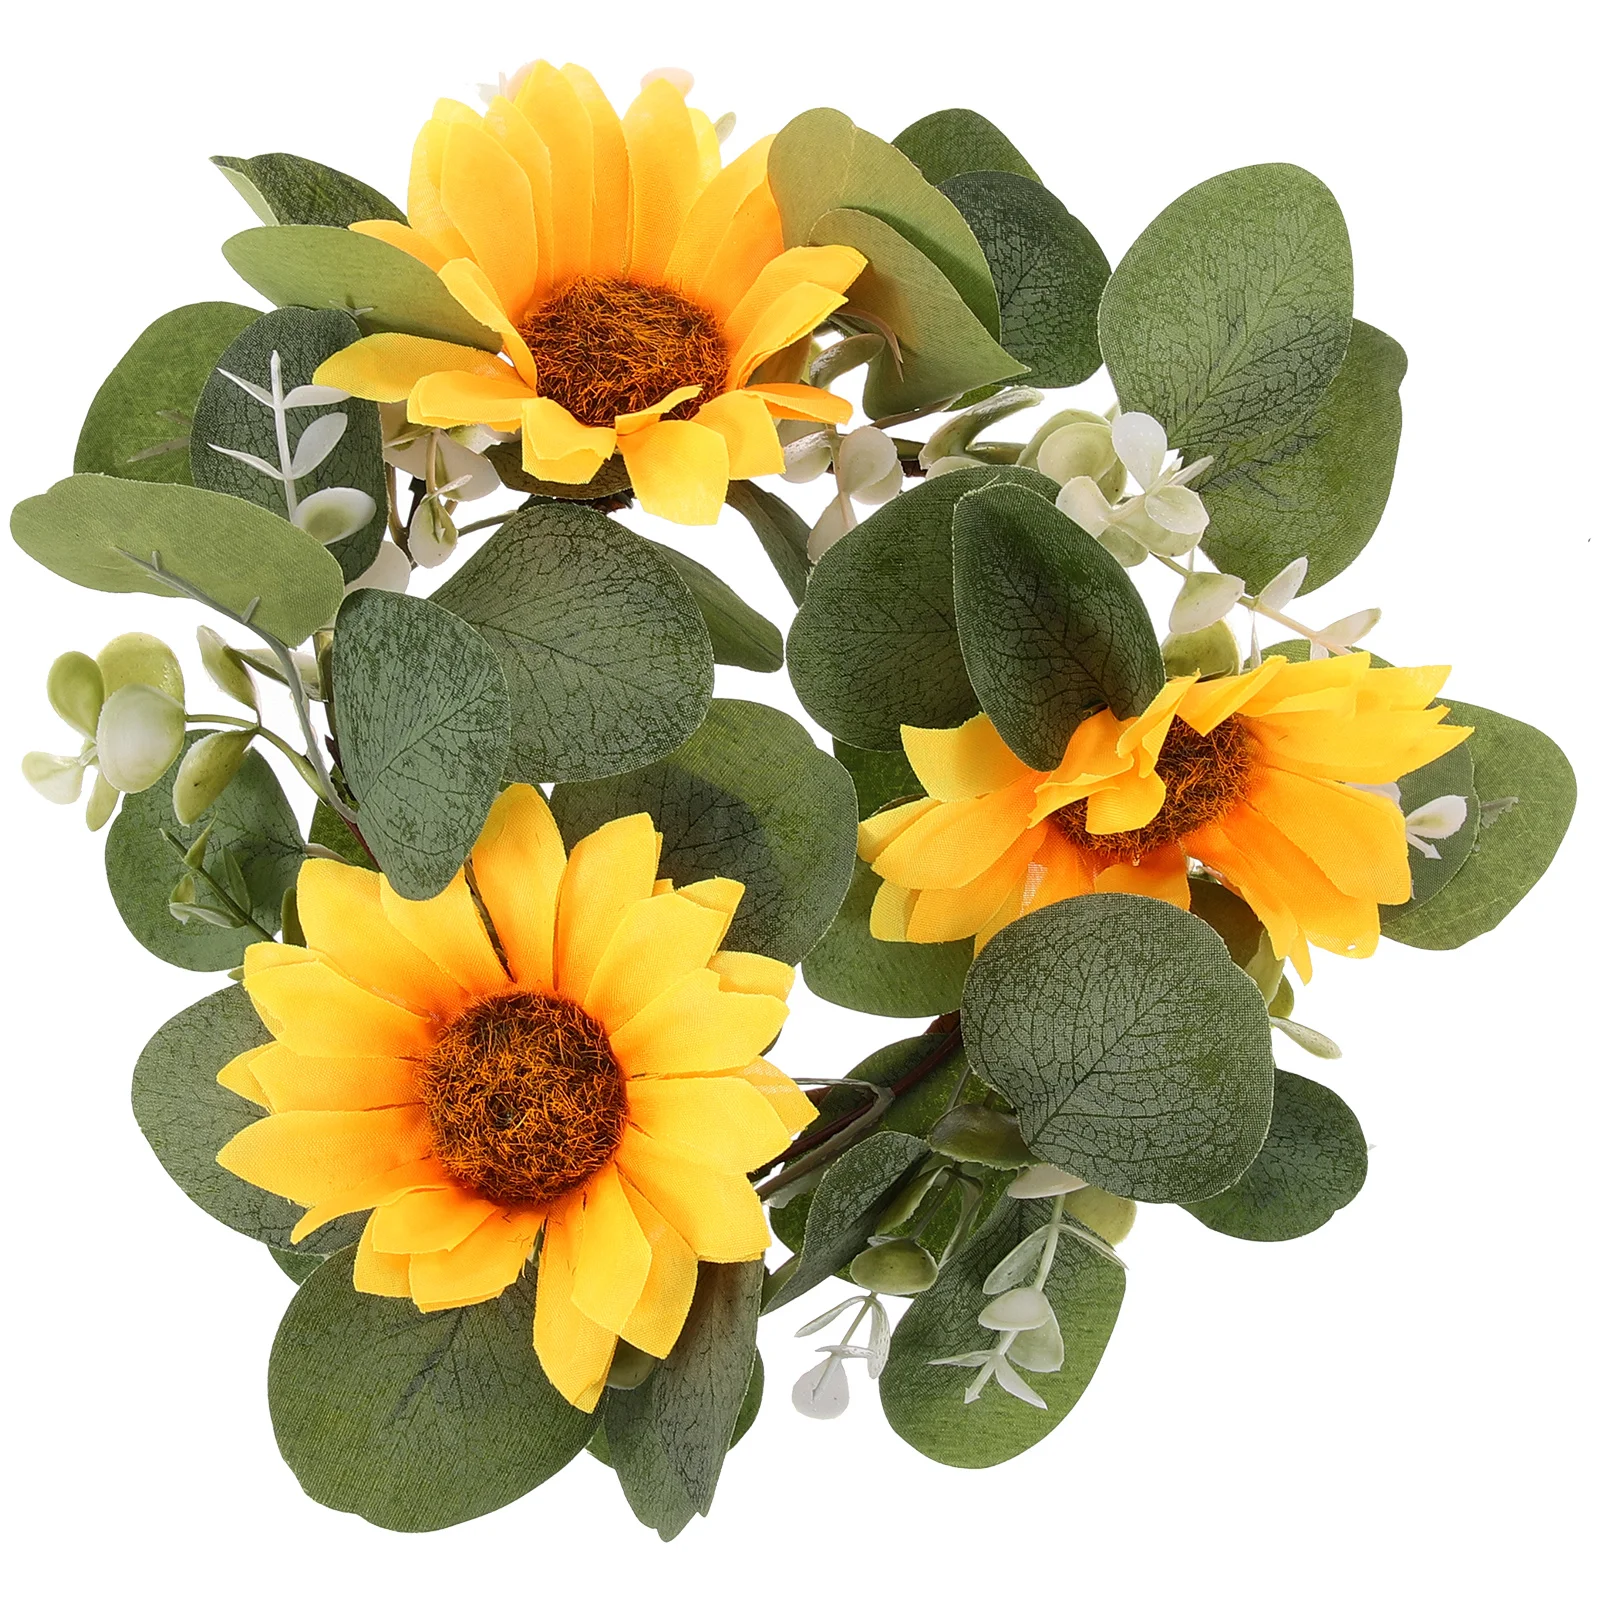 

Wreath Small Fall Garlands for Decor Leaf Decoration Sunflower Decorative Eucalyptus Leaves Front Door Wreaths